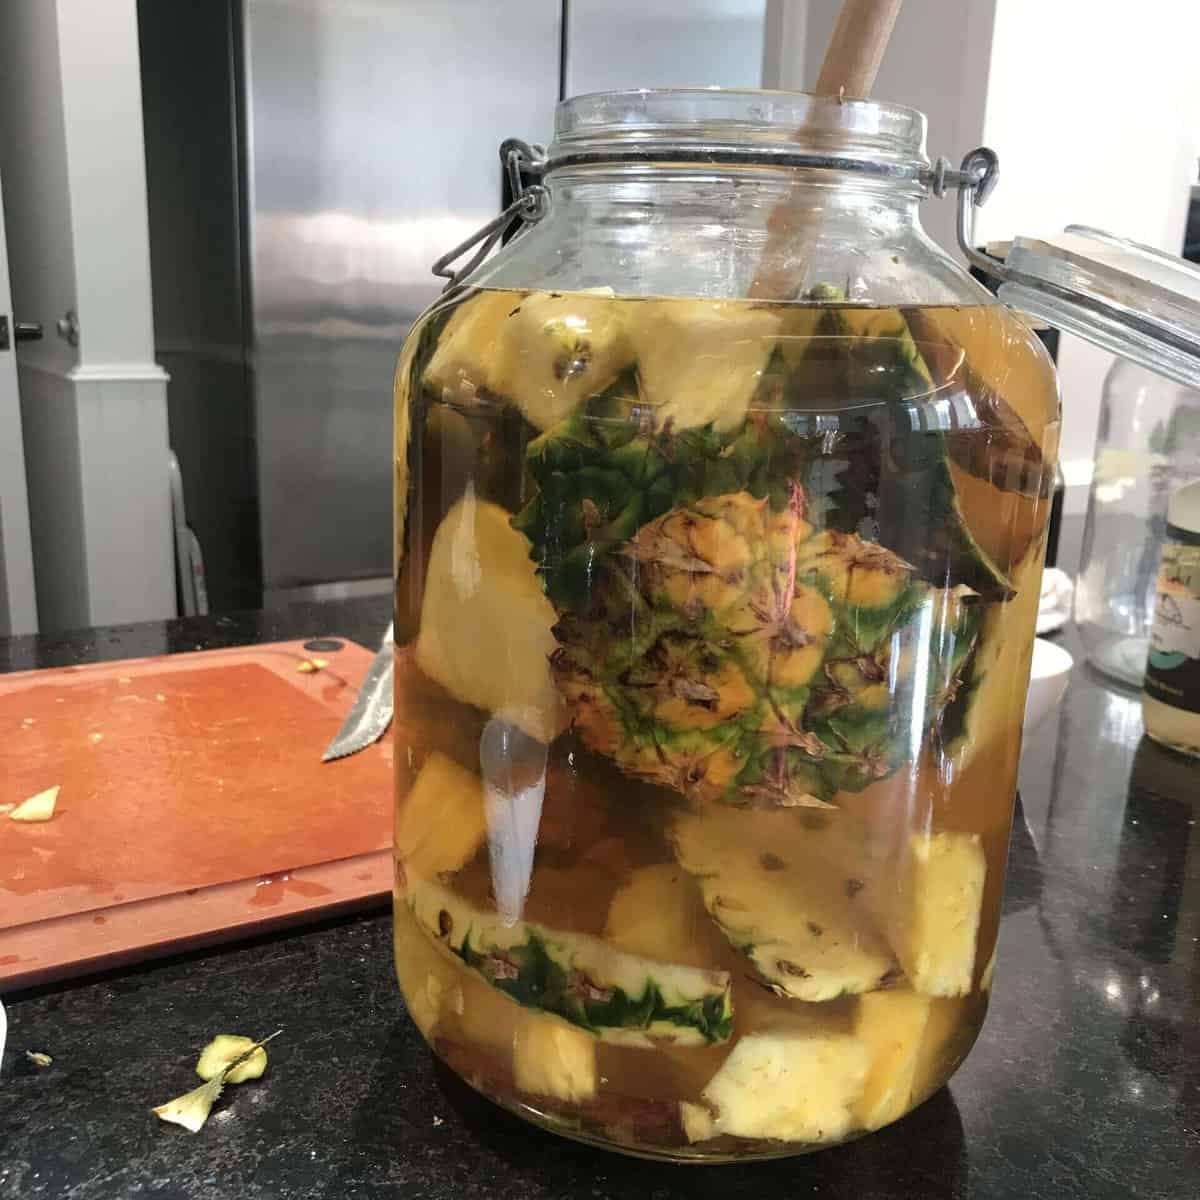 Chopped Pineapple in a Glass Jar for Fermenting